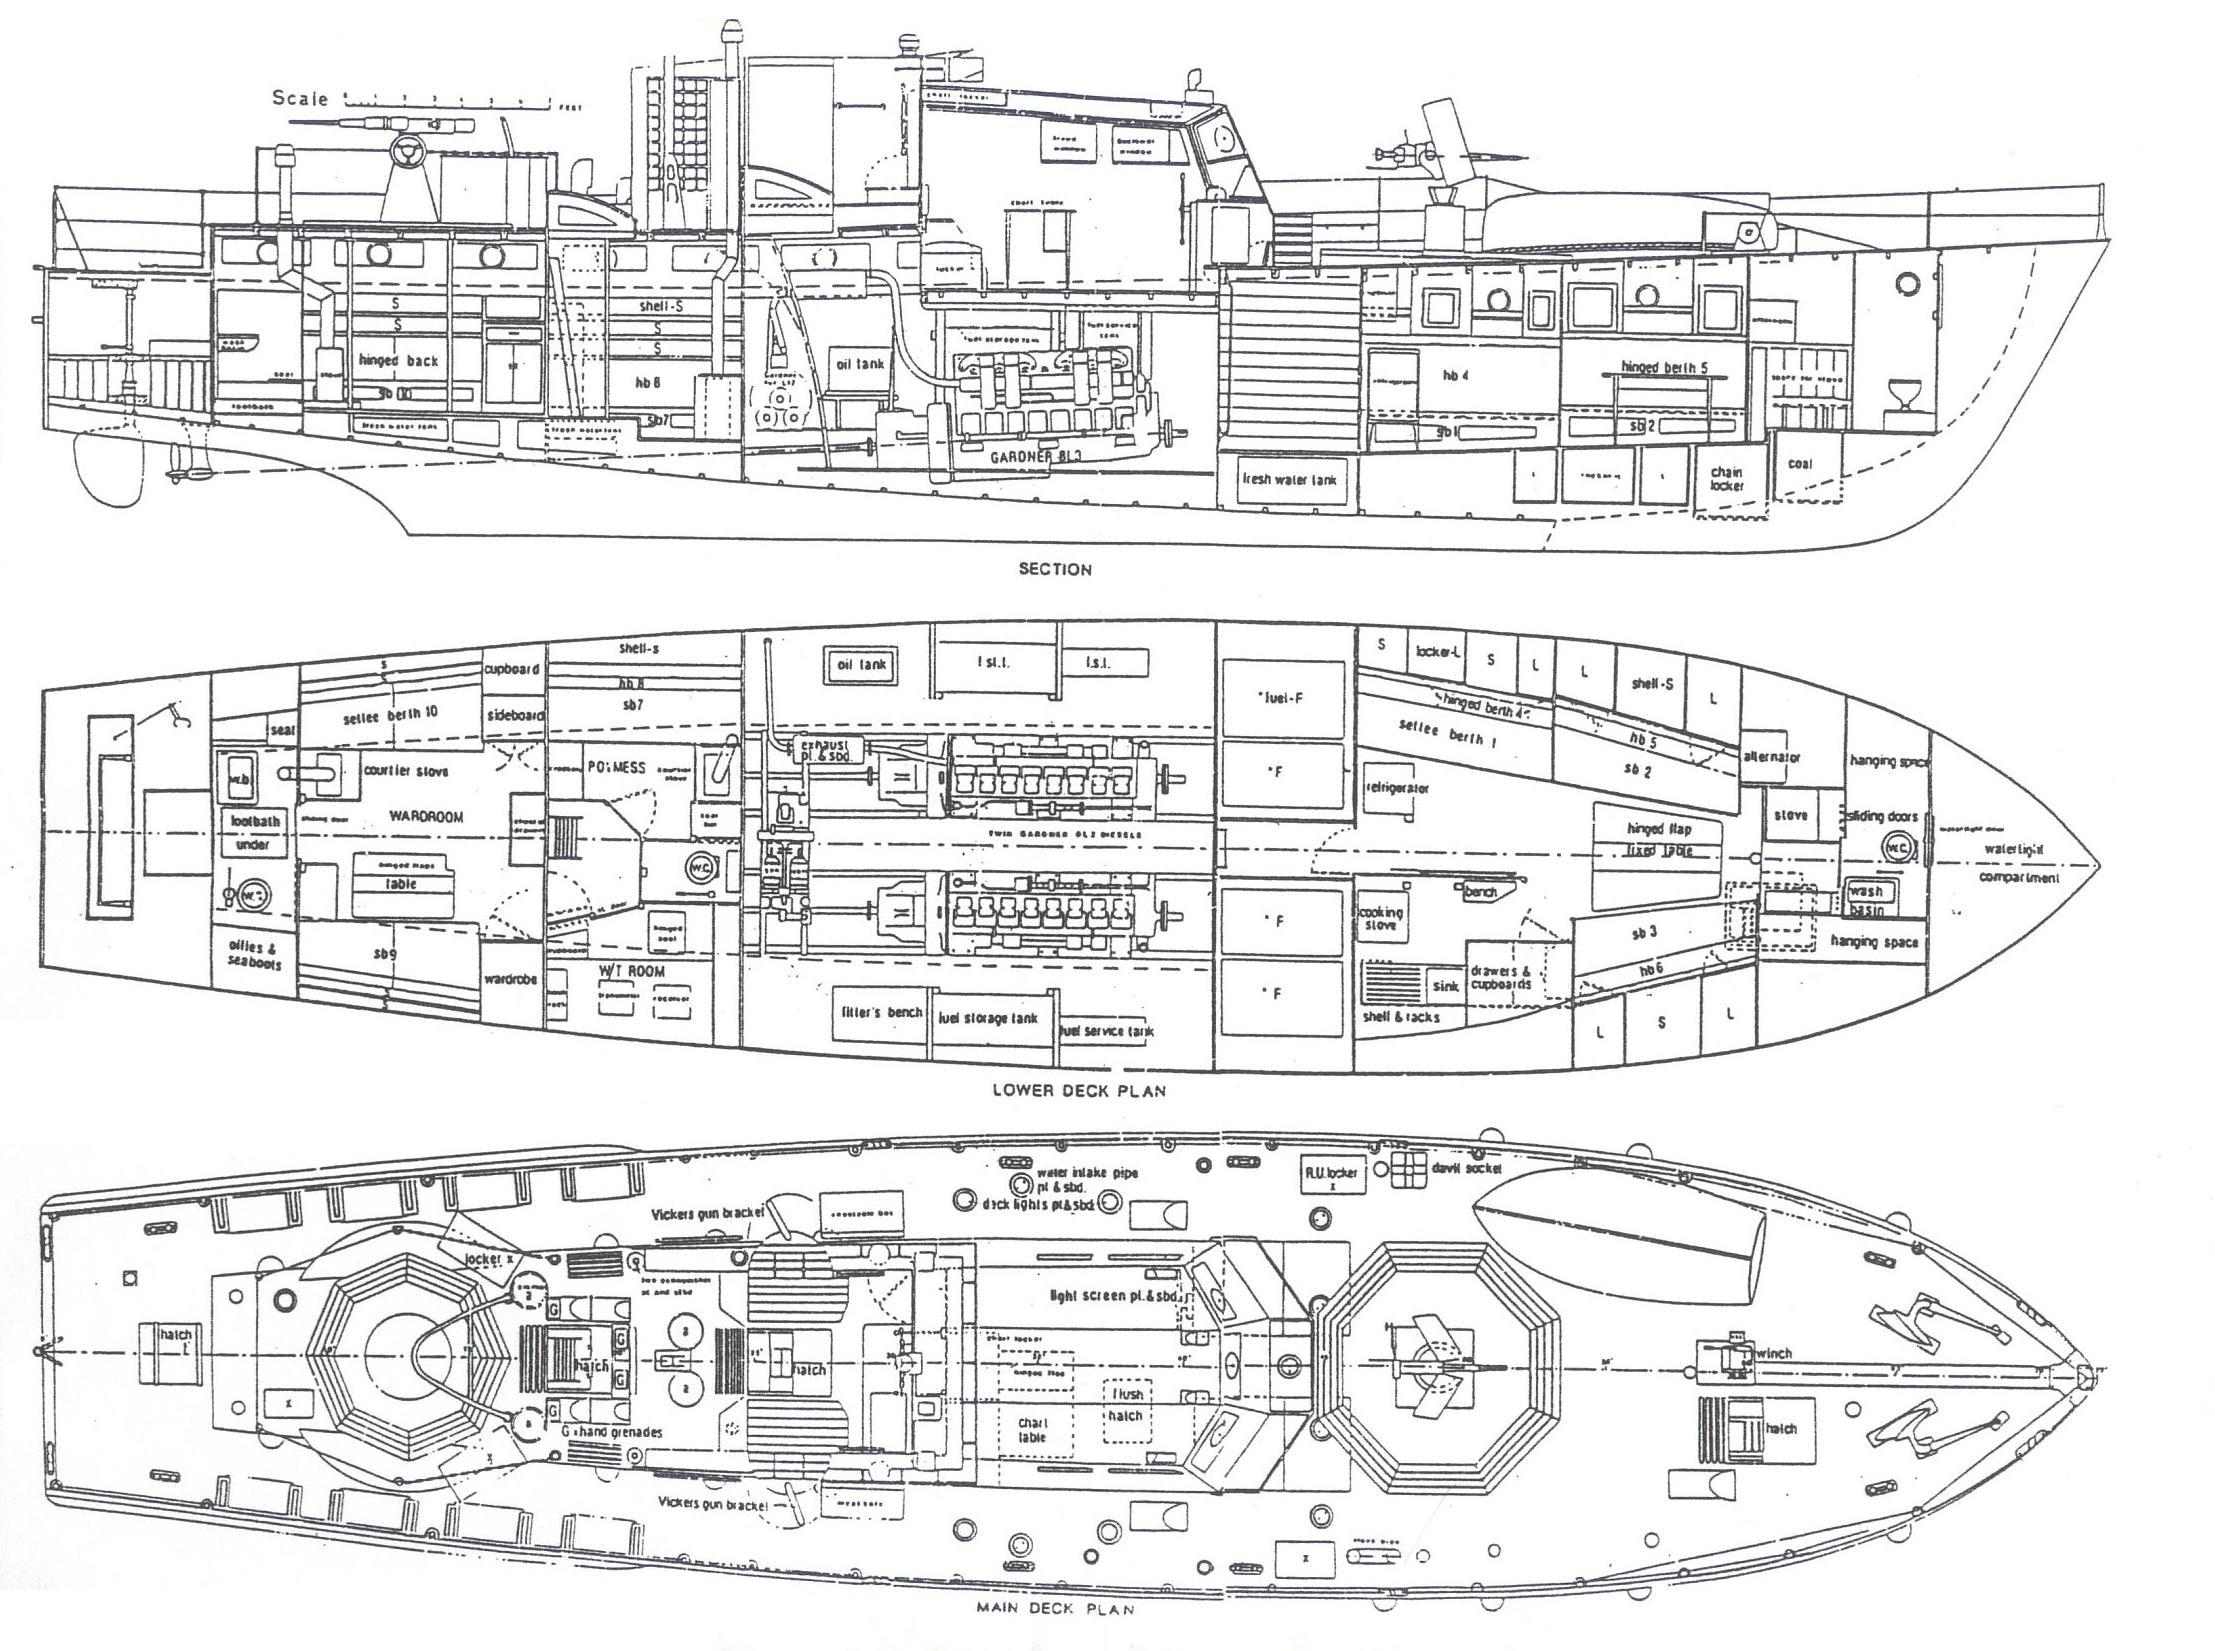 Ship Engineering Drawing Images